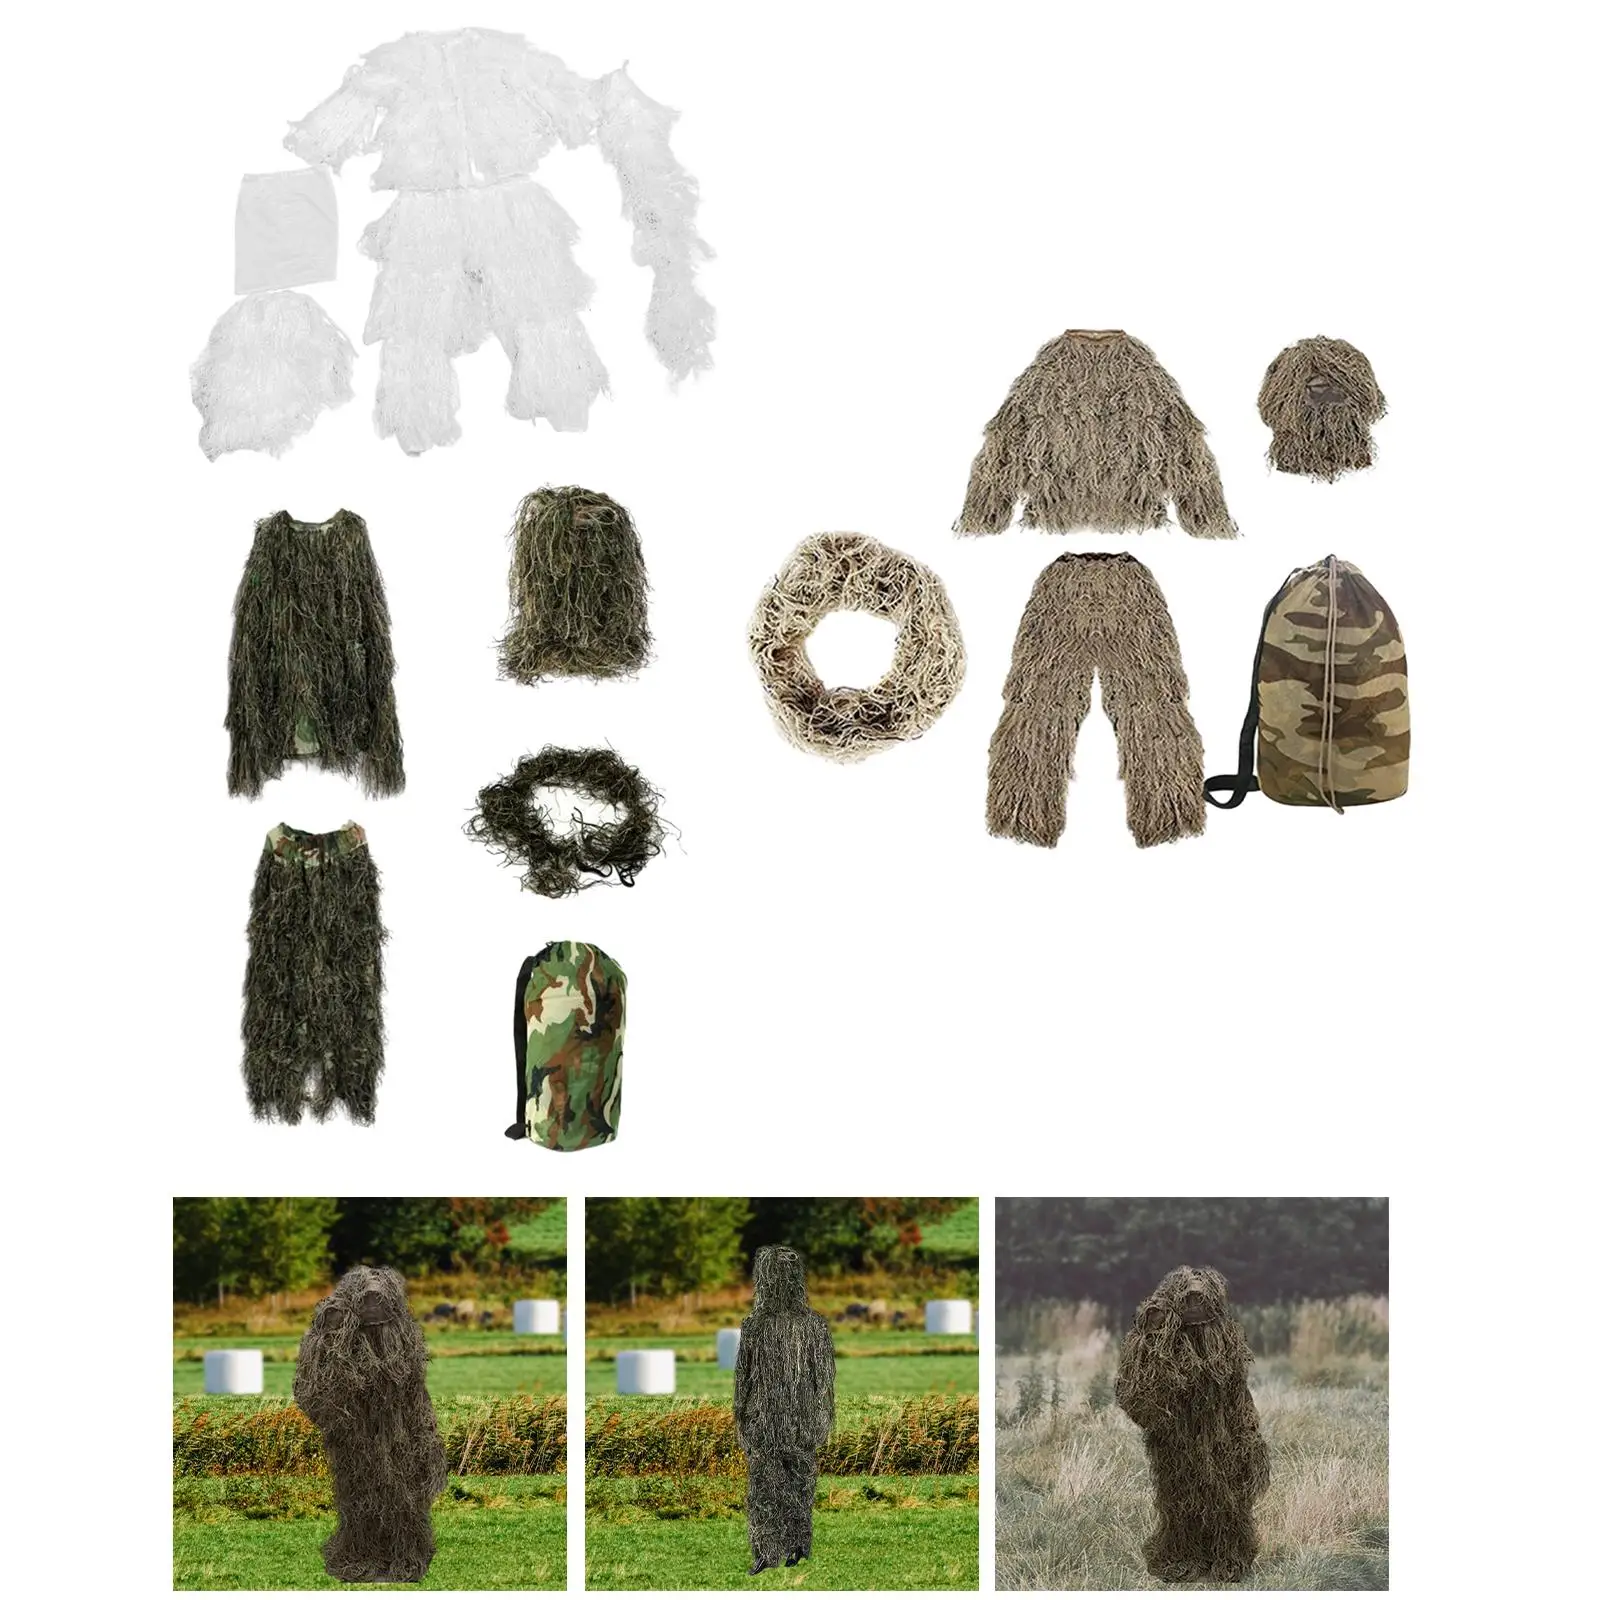 Kids Ghillie Suit Clothes Jacket Lightweight Clothing Uniform Set Costume for Game Halloween Birdwatching Party Accessories